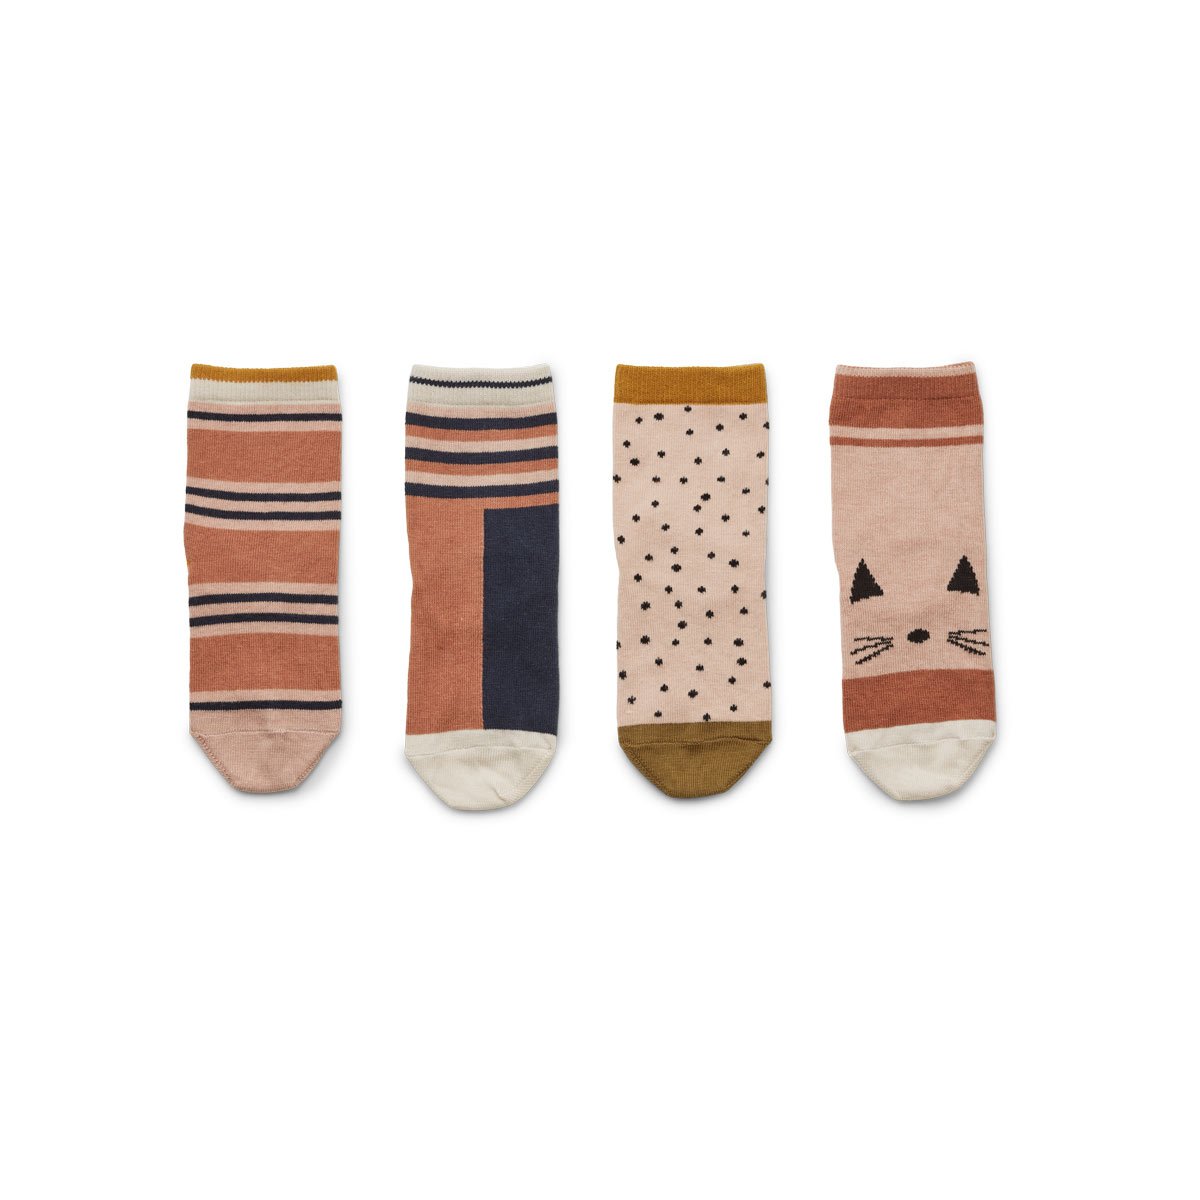 SILAS COTTON SOCKS 4 PACK